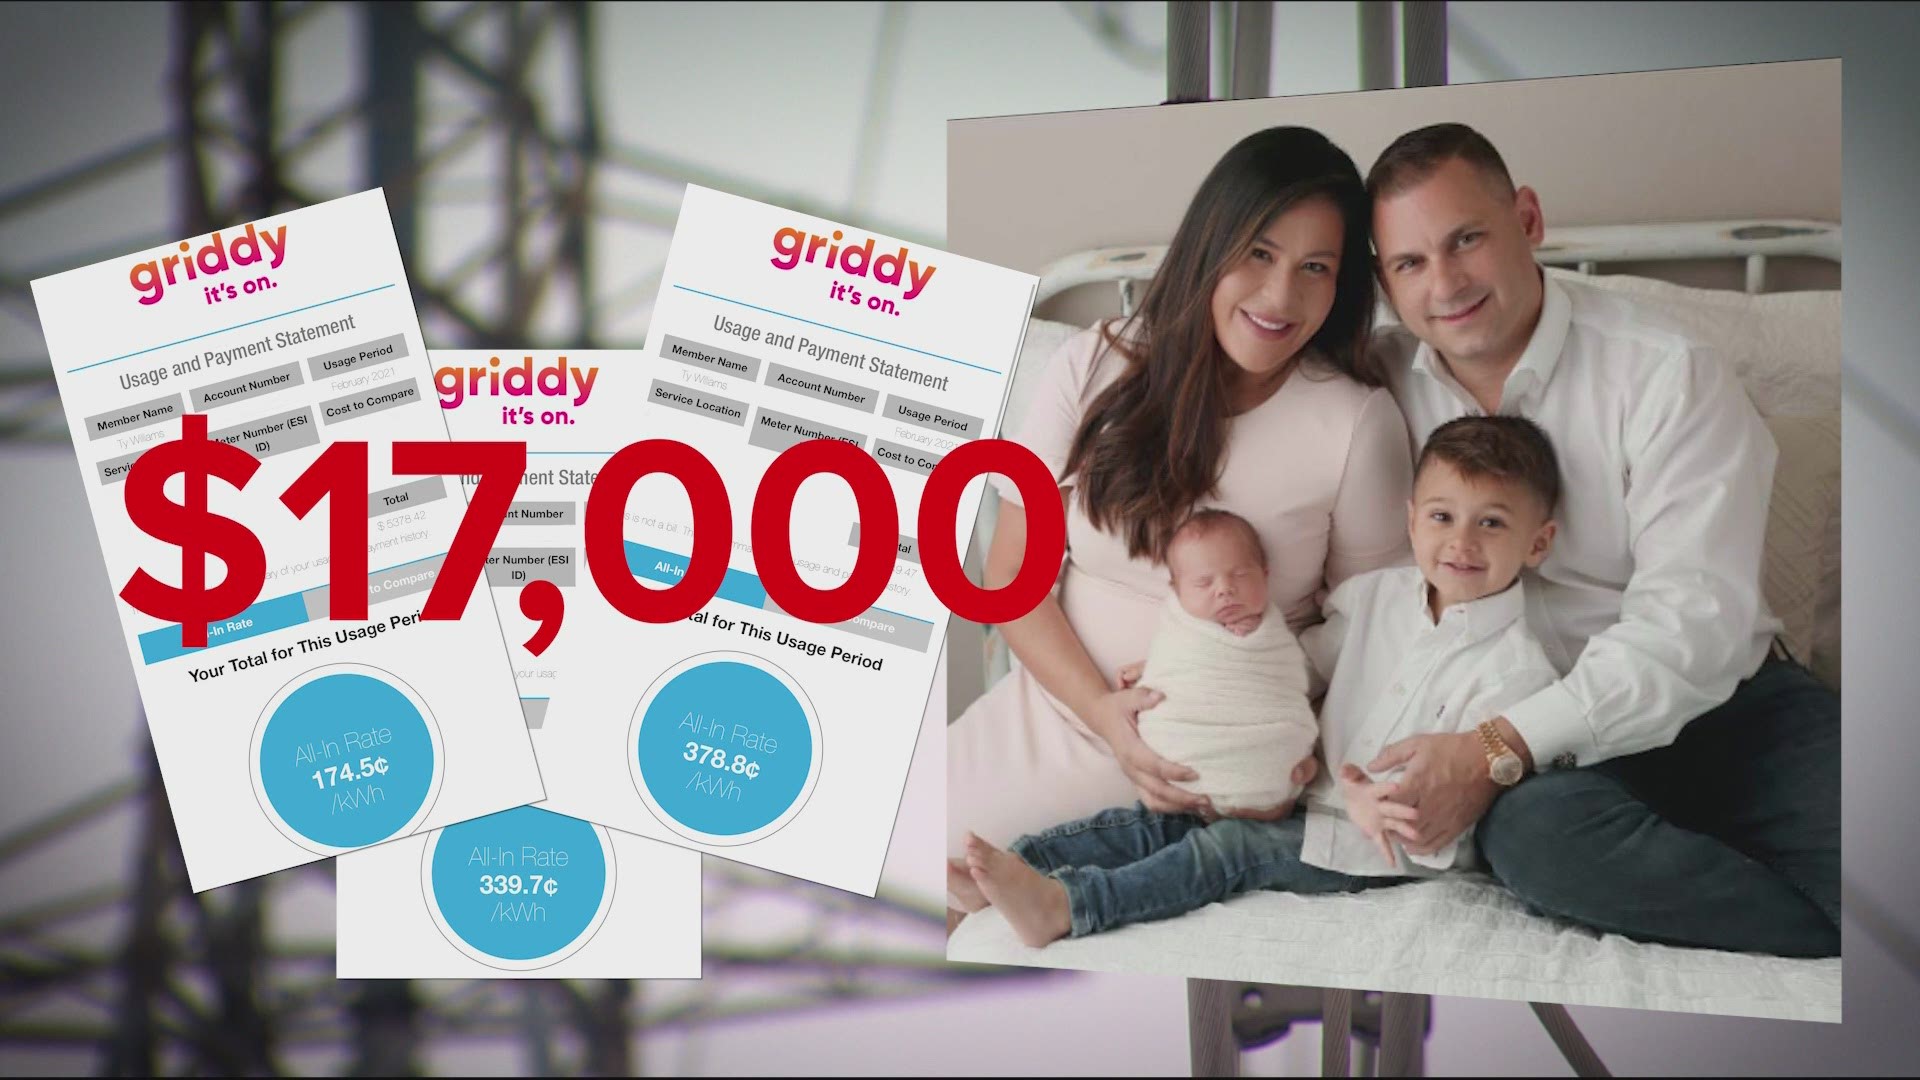 Griddy did not say what it plans to do to help customers but said, "We intend to fight this for, and alongside, our customers."